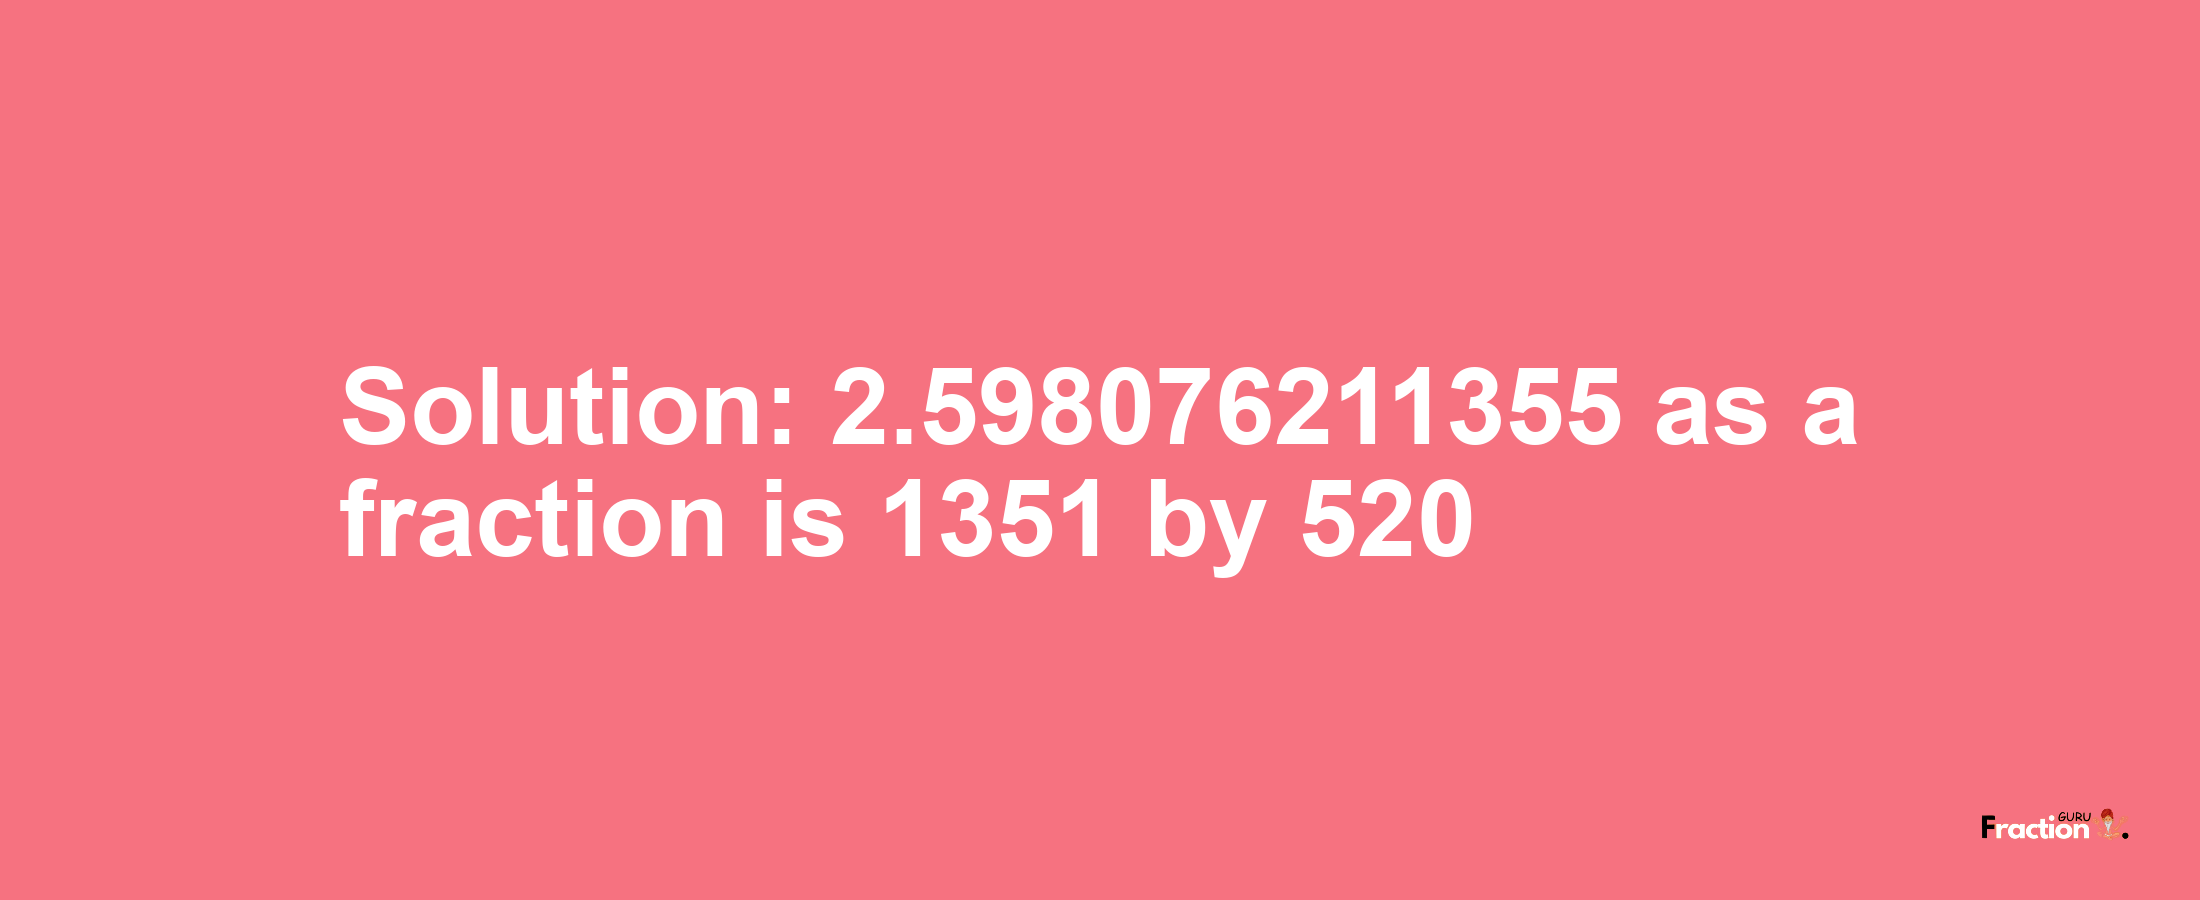 Solution:2.598076211355 as a fraction is 1351/520